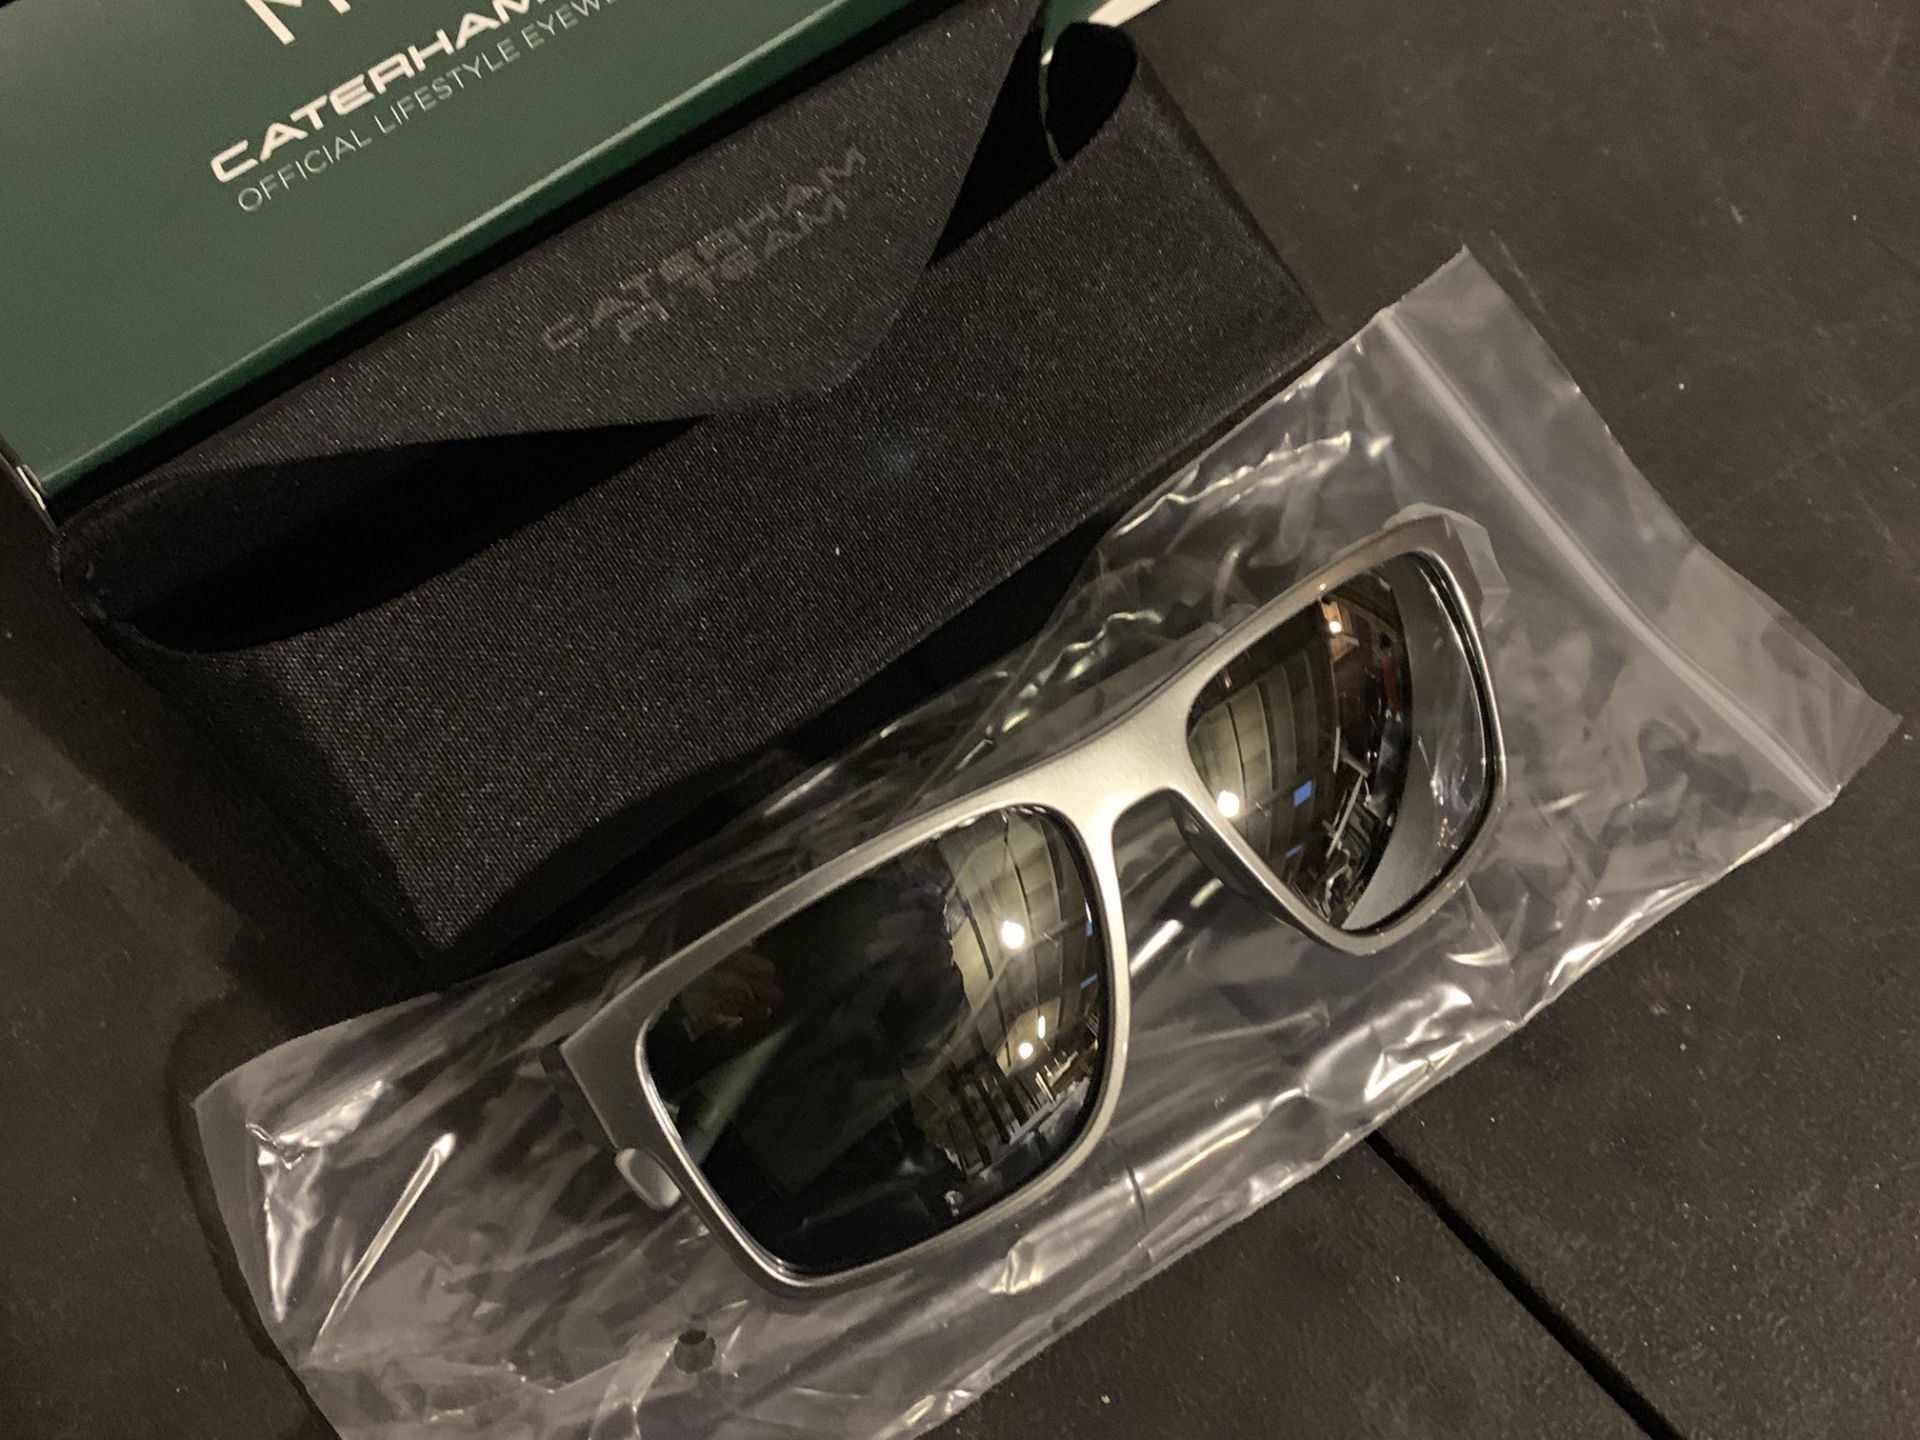 CATERHAM F1 SUNGLASSES WITH CASES X 3 - Image 2 of 3